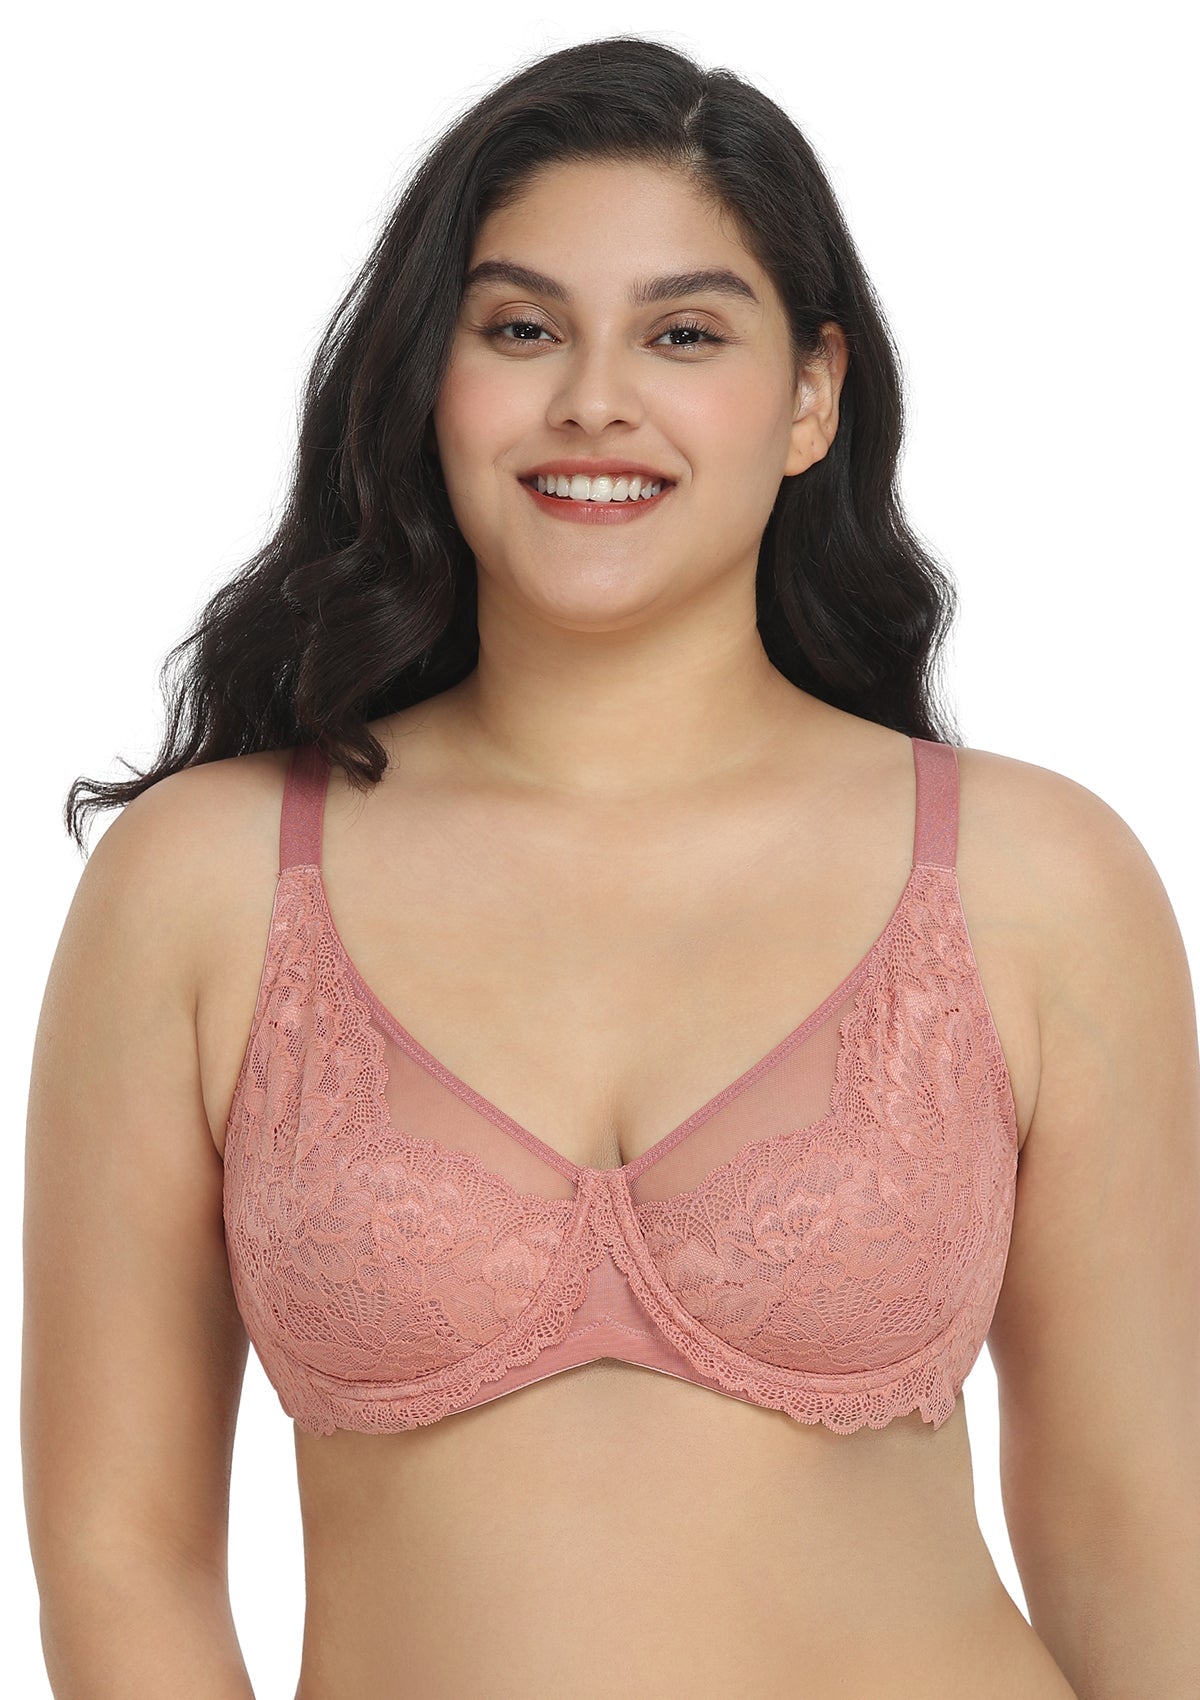 HSIA Paeonia Lace Full Coverage Underwire Non-Padded Uplifting Bra - Light Coral / 42 / DDD/F